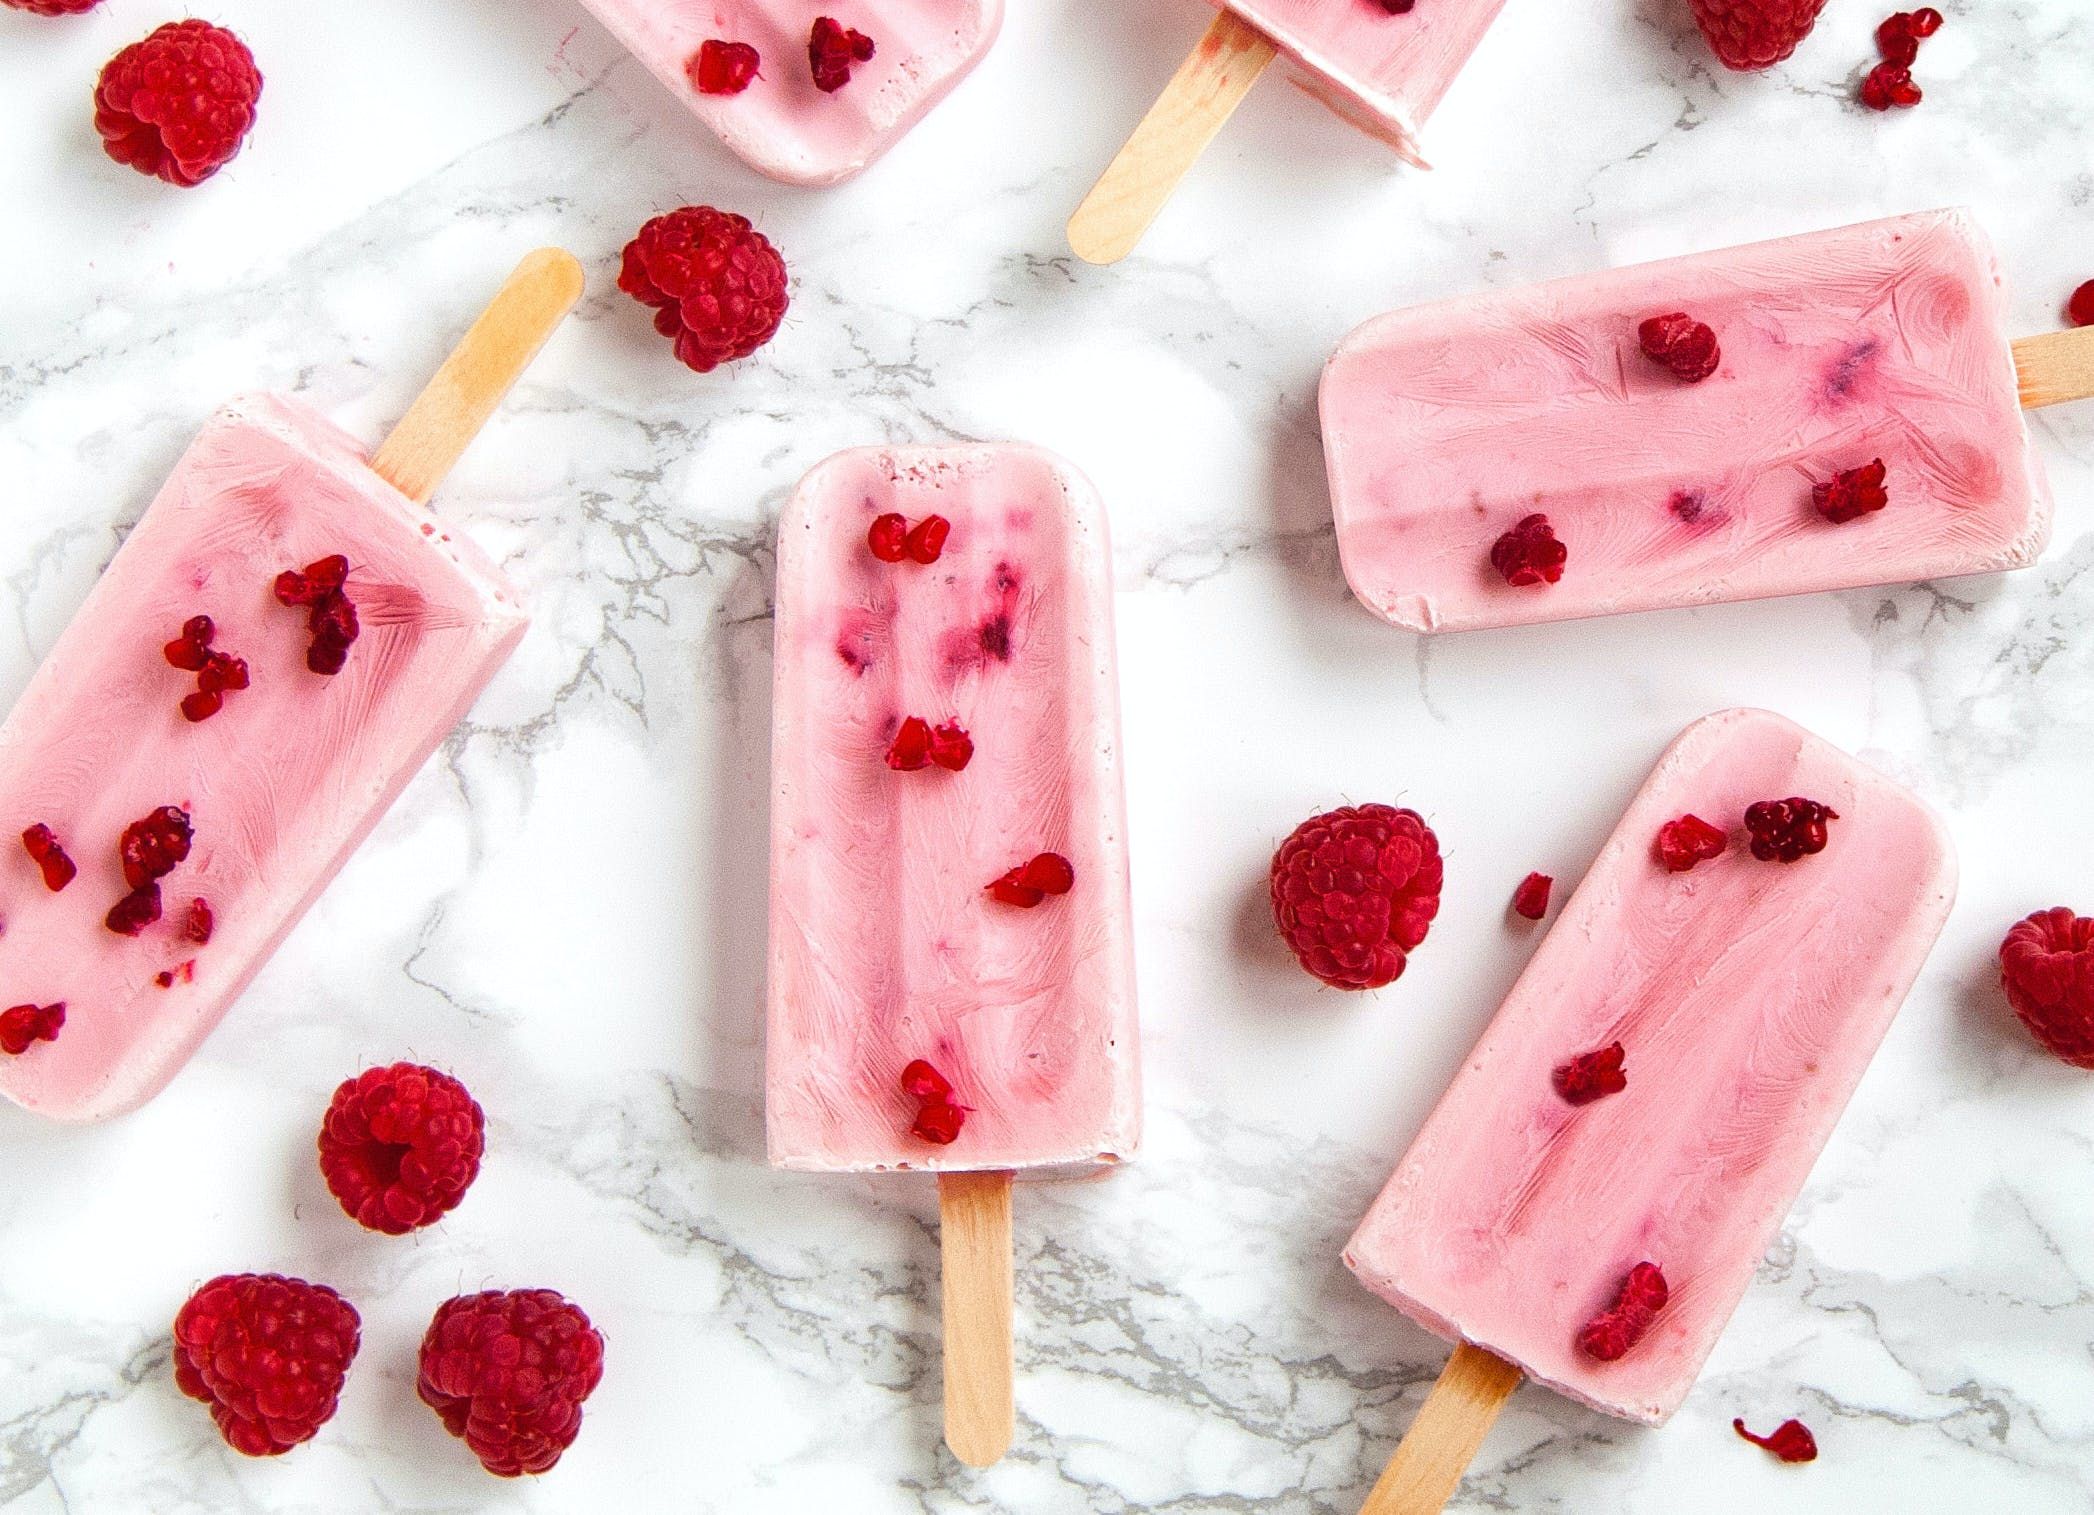 diy_recipe_healthy_cannabis_infused_fruit_popsicles_3aa2e25ab2